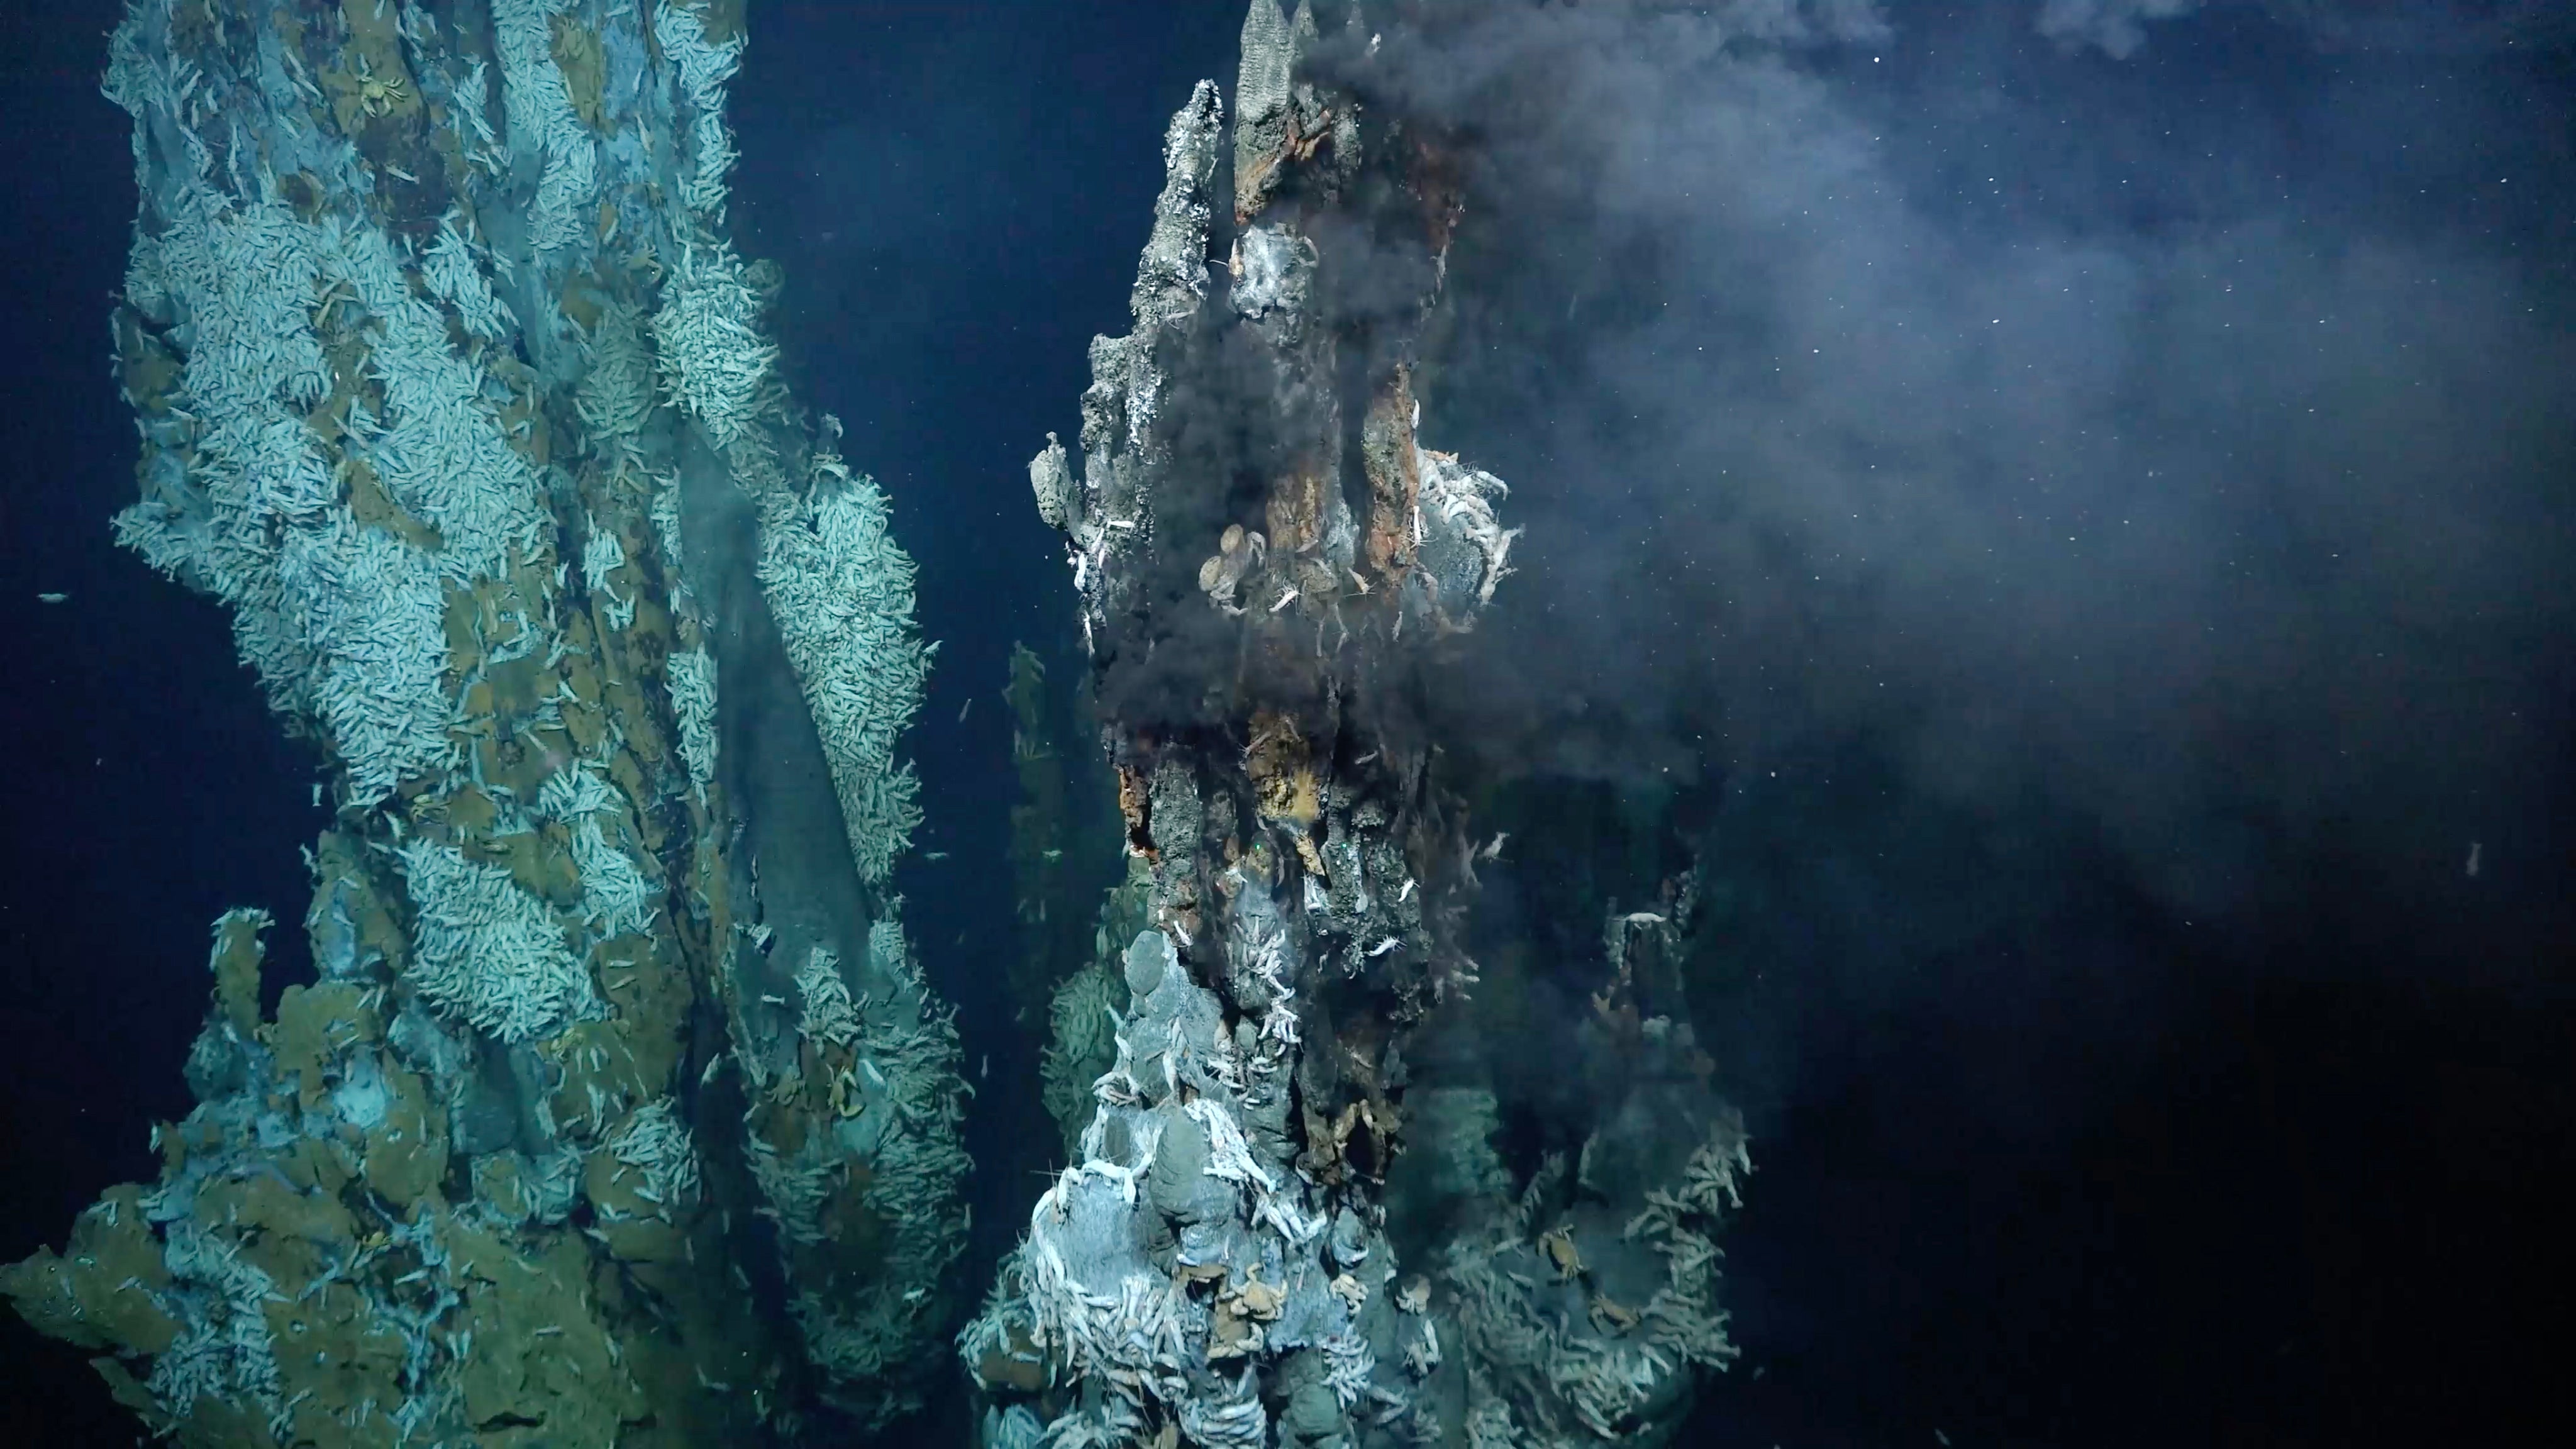 One of the new vents, discovered about 6,560 feet (2,000 meters) underwater on the Puy des Folles Seamount. The cloudy substance in the upper right is the hot, nutrient-rich water being expelled from the vent.  (Photo: ROV SuBastian / Schmidt Ocean Institute)